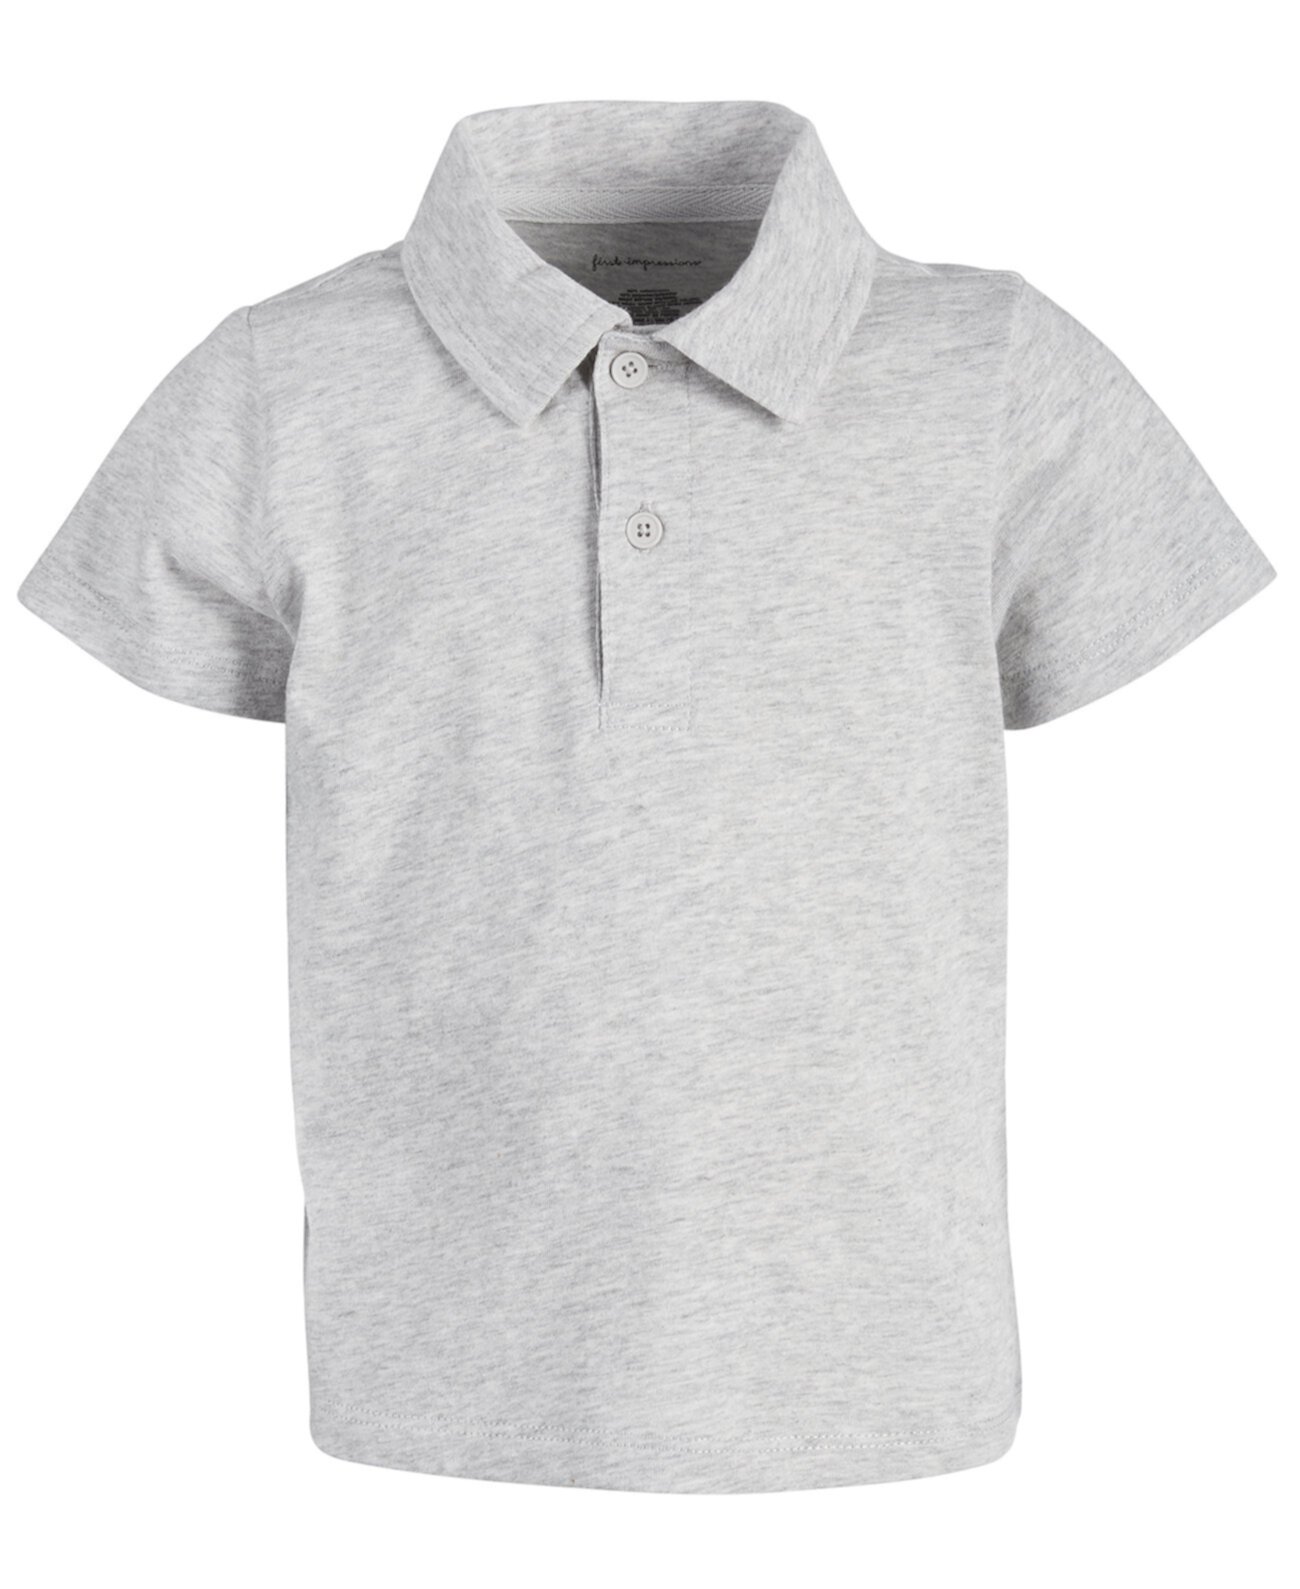 Baby Boys Heathered Cotton Polo, Created for Macy's First Impressions